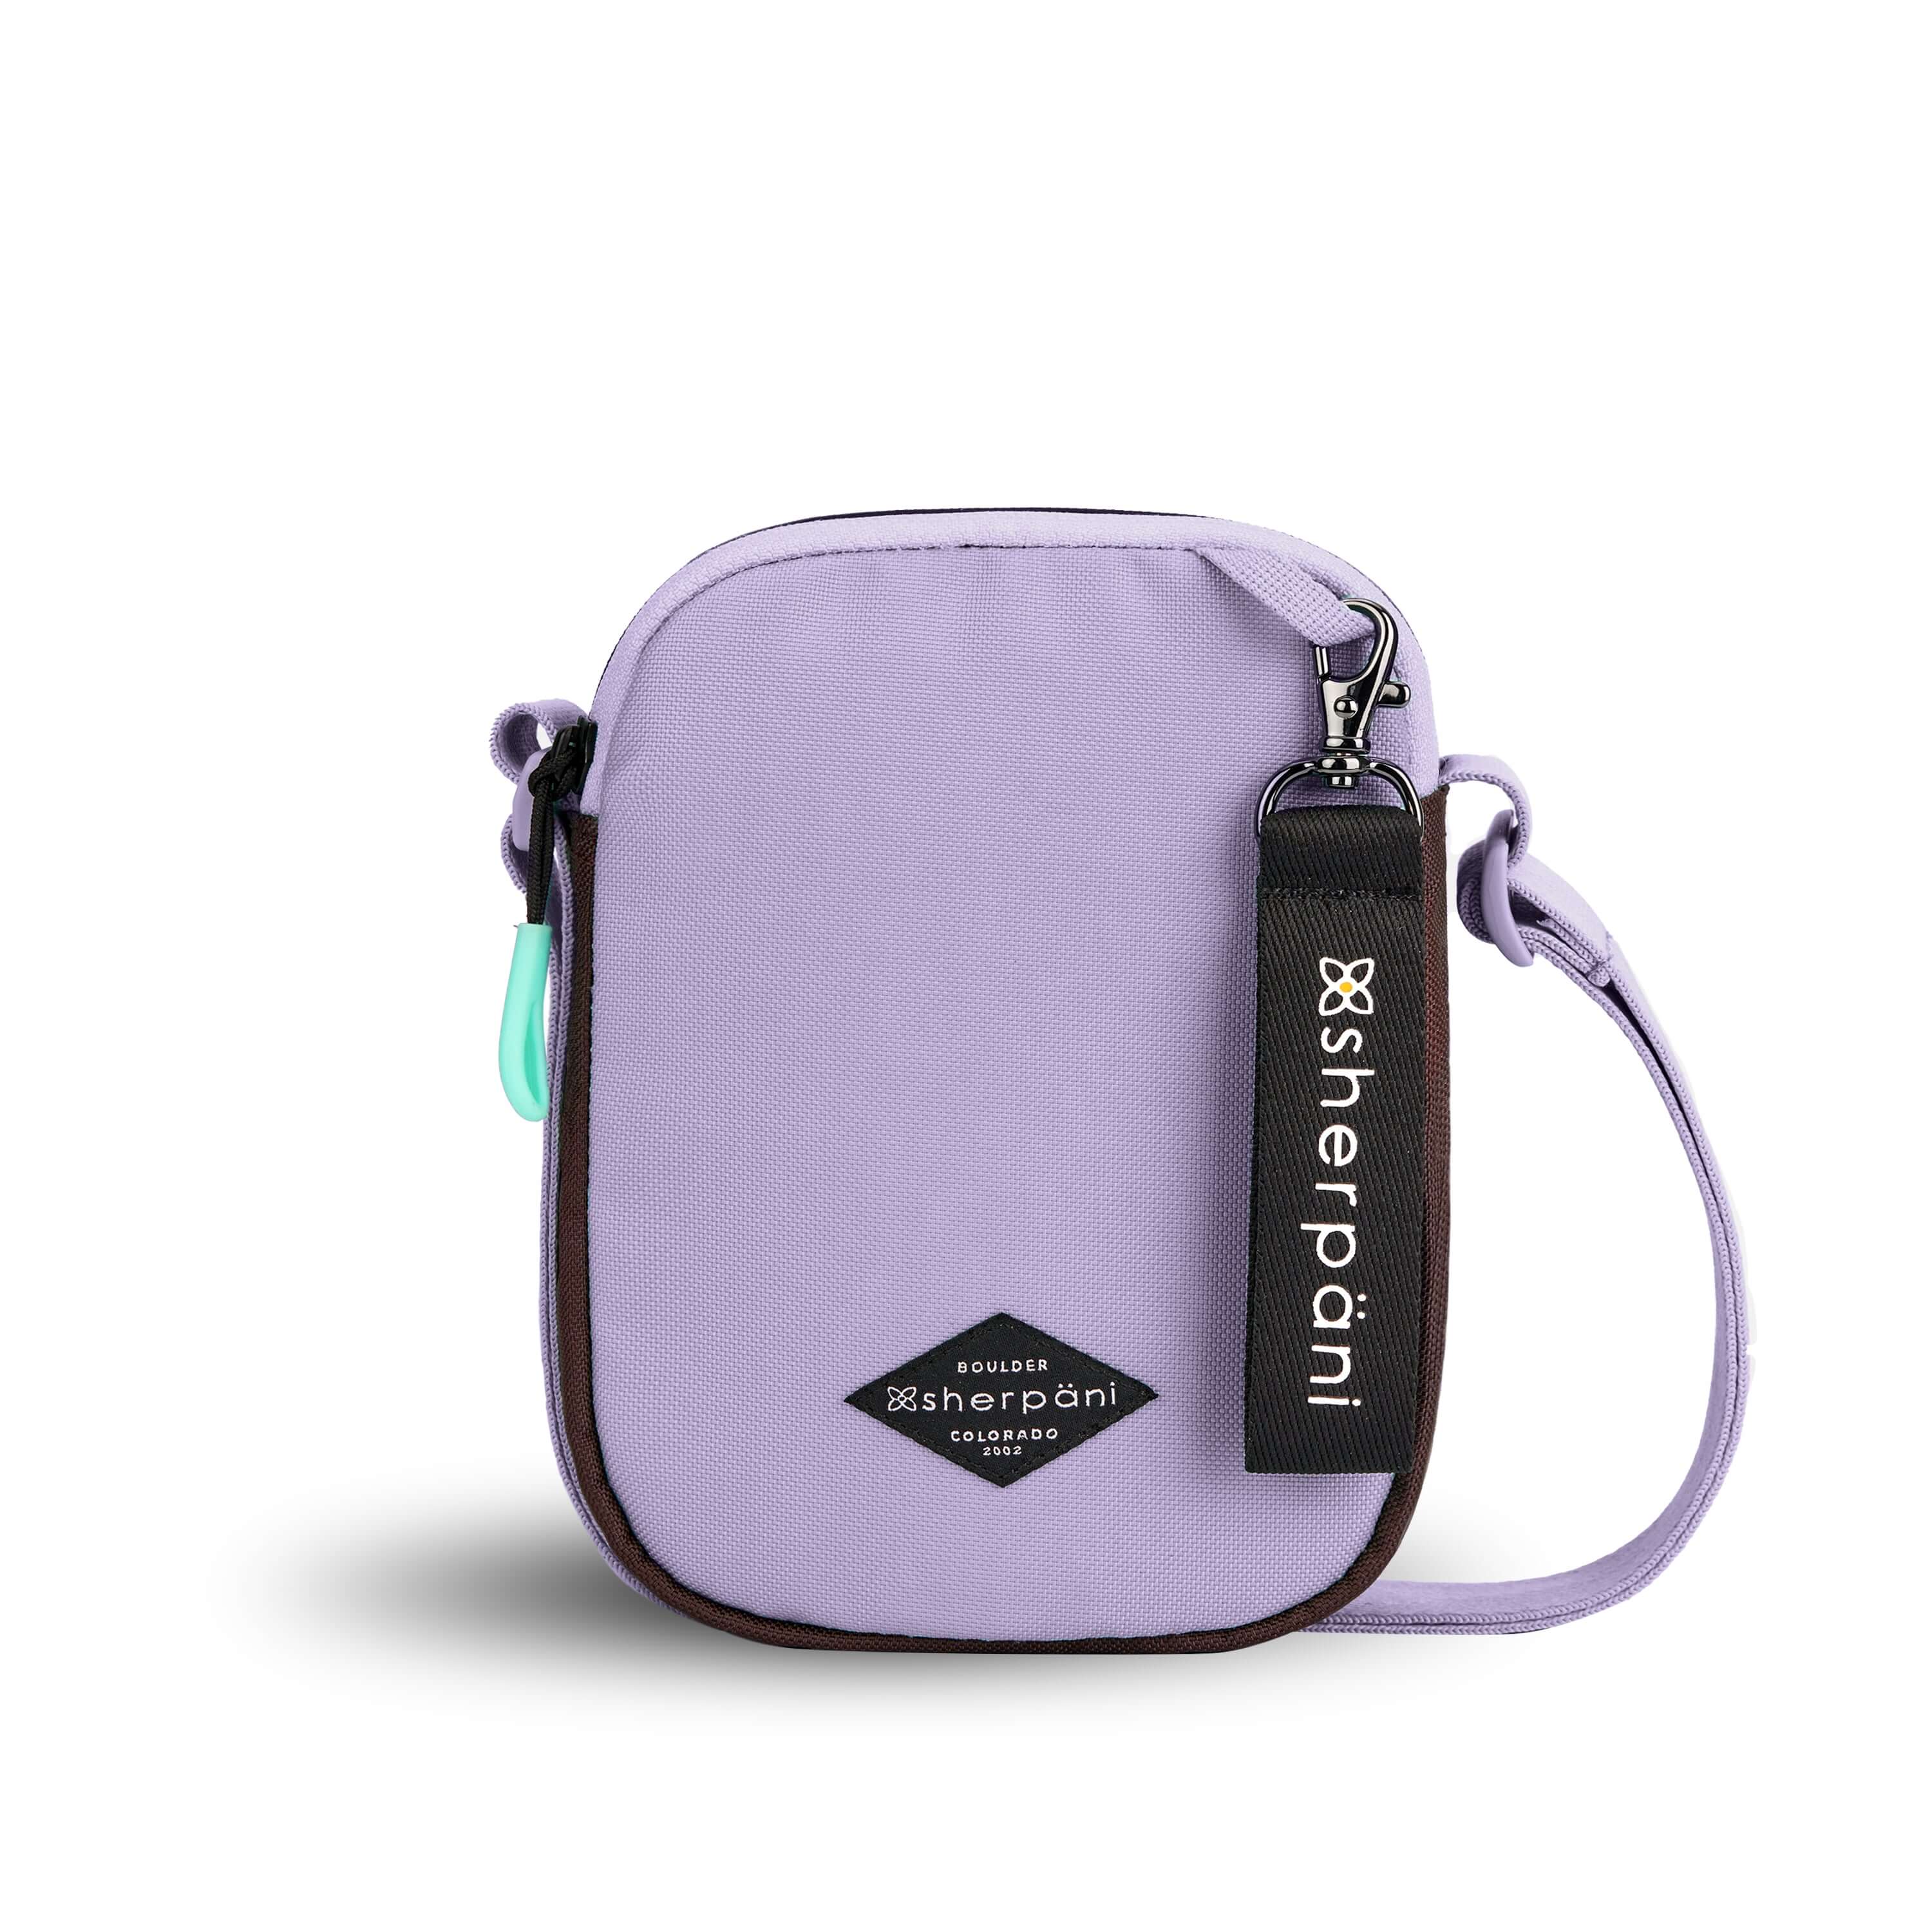 Flat front view of Sherpani crossbody, the Rogue in Lavender. The bag is two toned: the front is lavender and the back is brown. The main zipper compartment features an easy-pull zipper accented in aqua. The bag has an adjustable crossbody strap. A branded Sherpani keychain is clipped to a fabric loop on the top right corner.